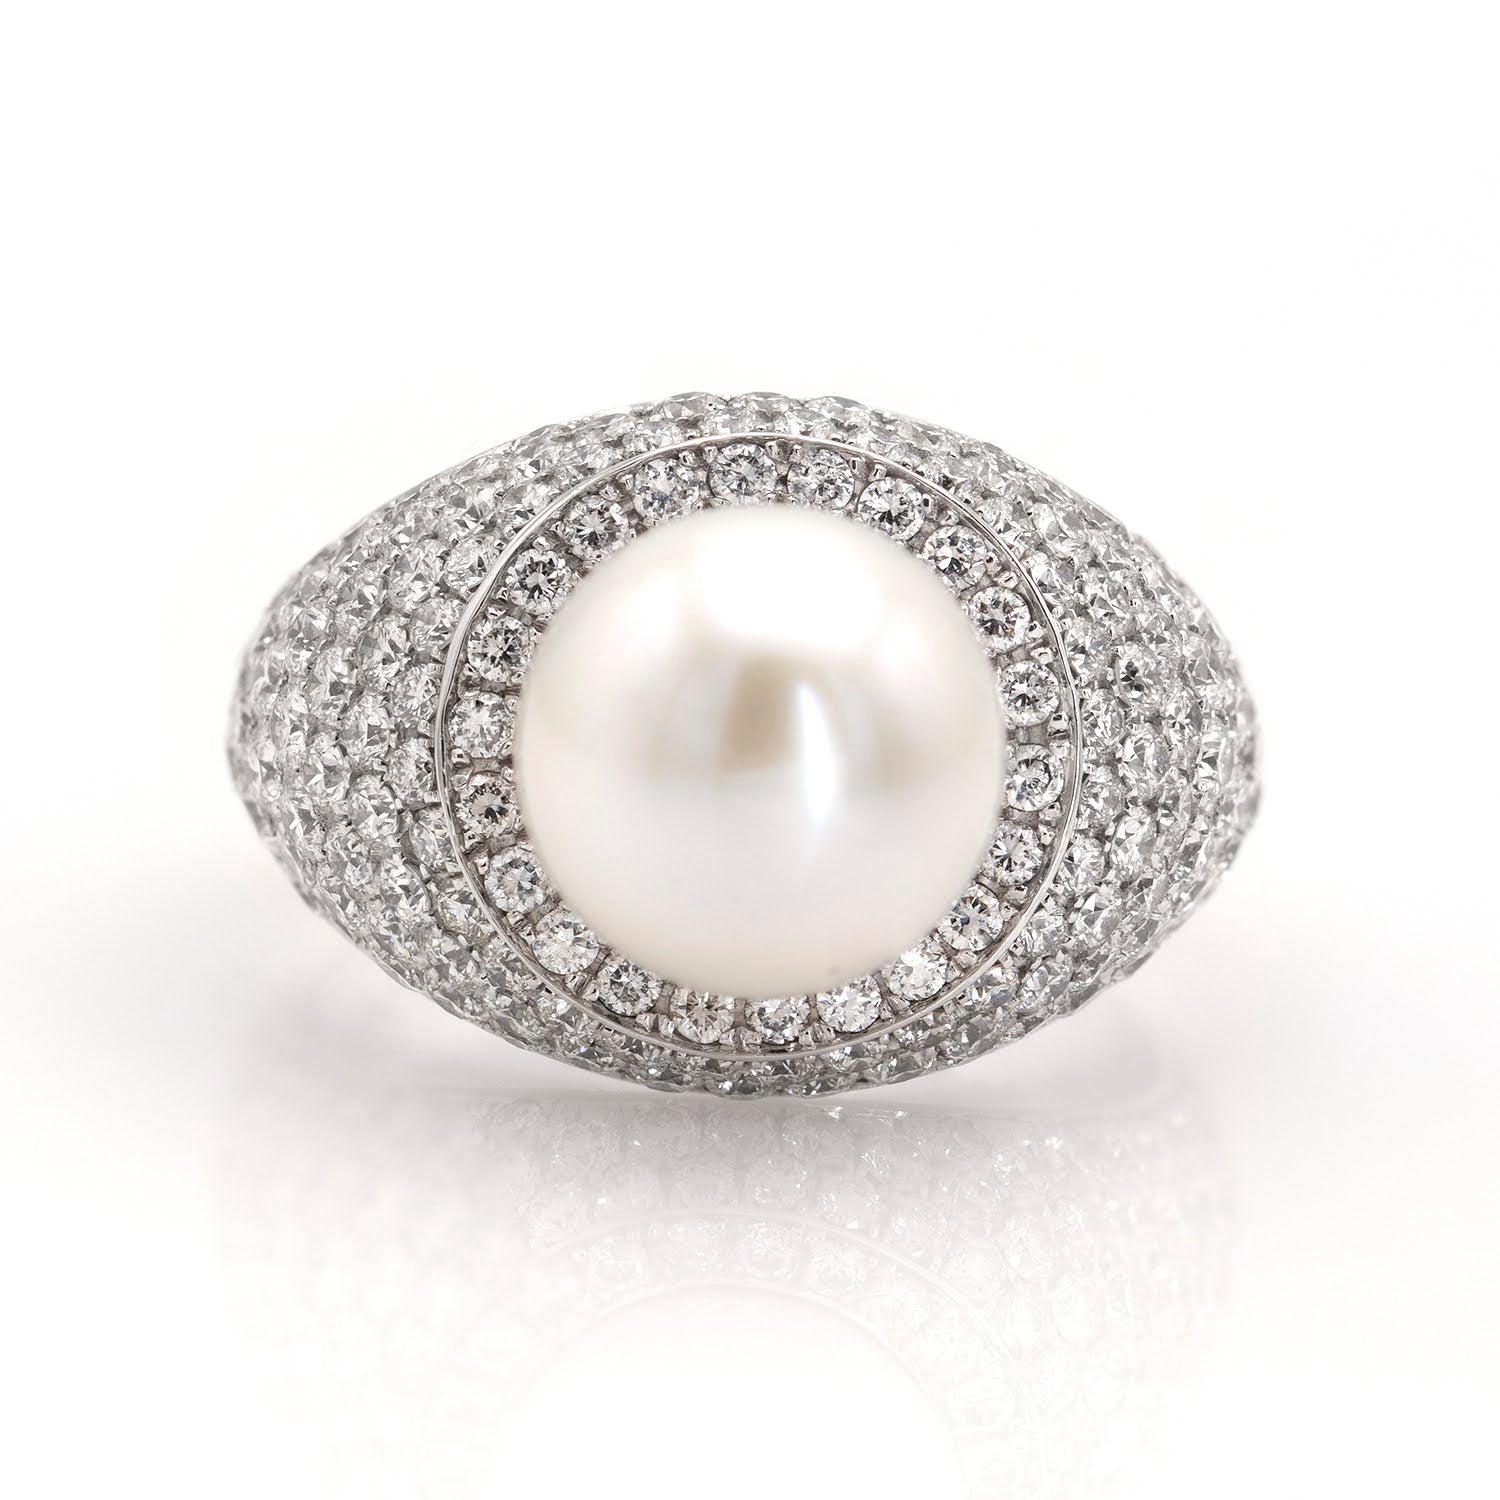 White Pearl and Diamonds Ring – Paris Collection